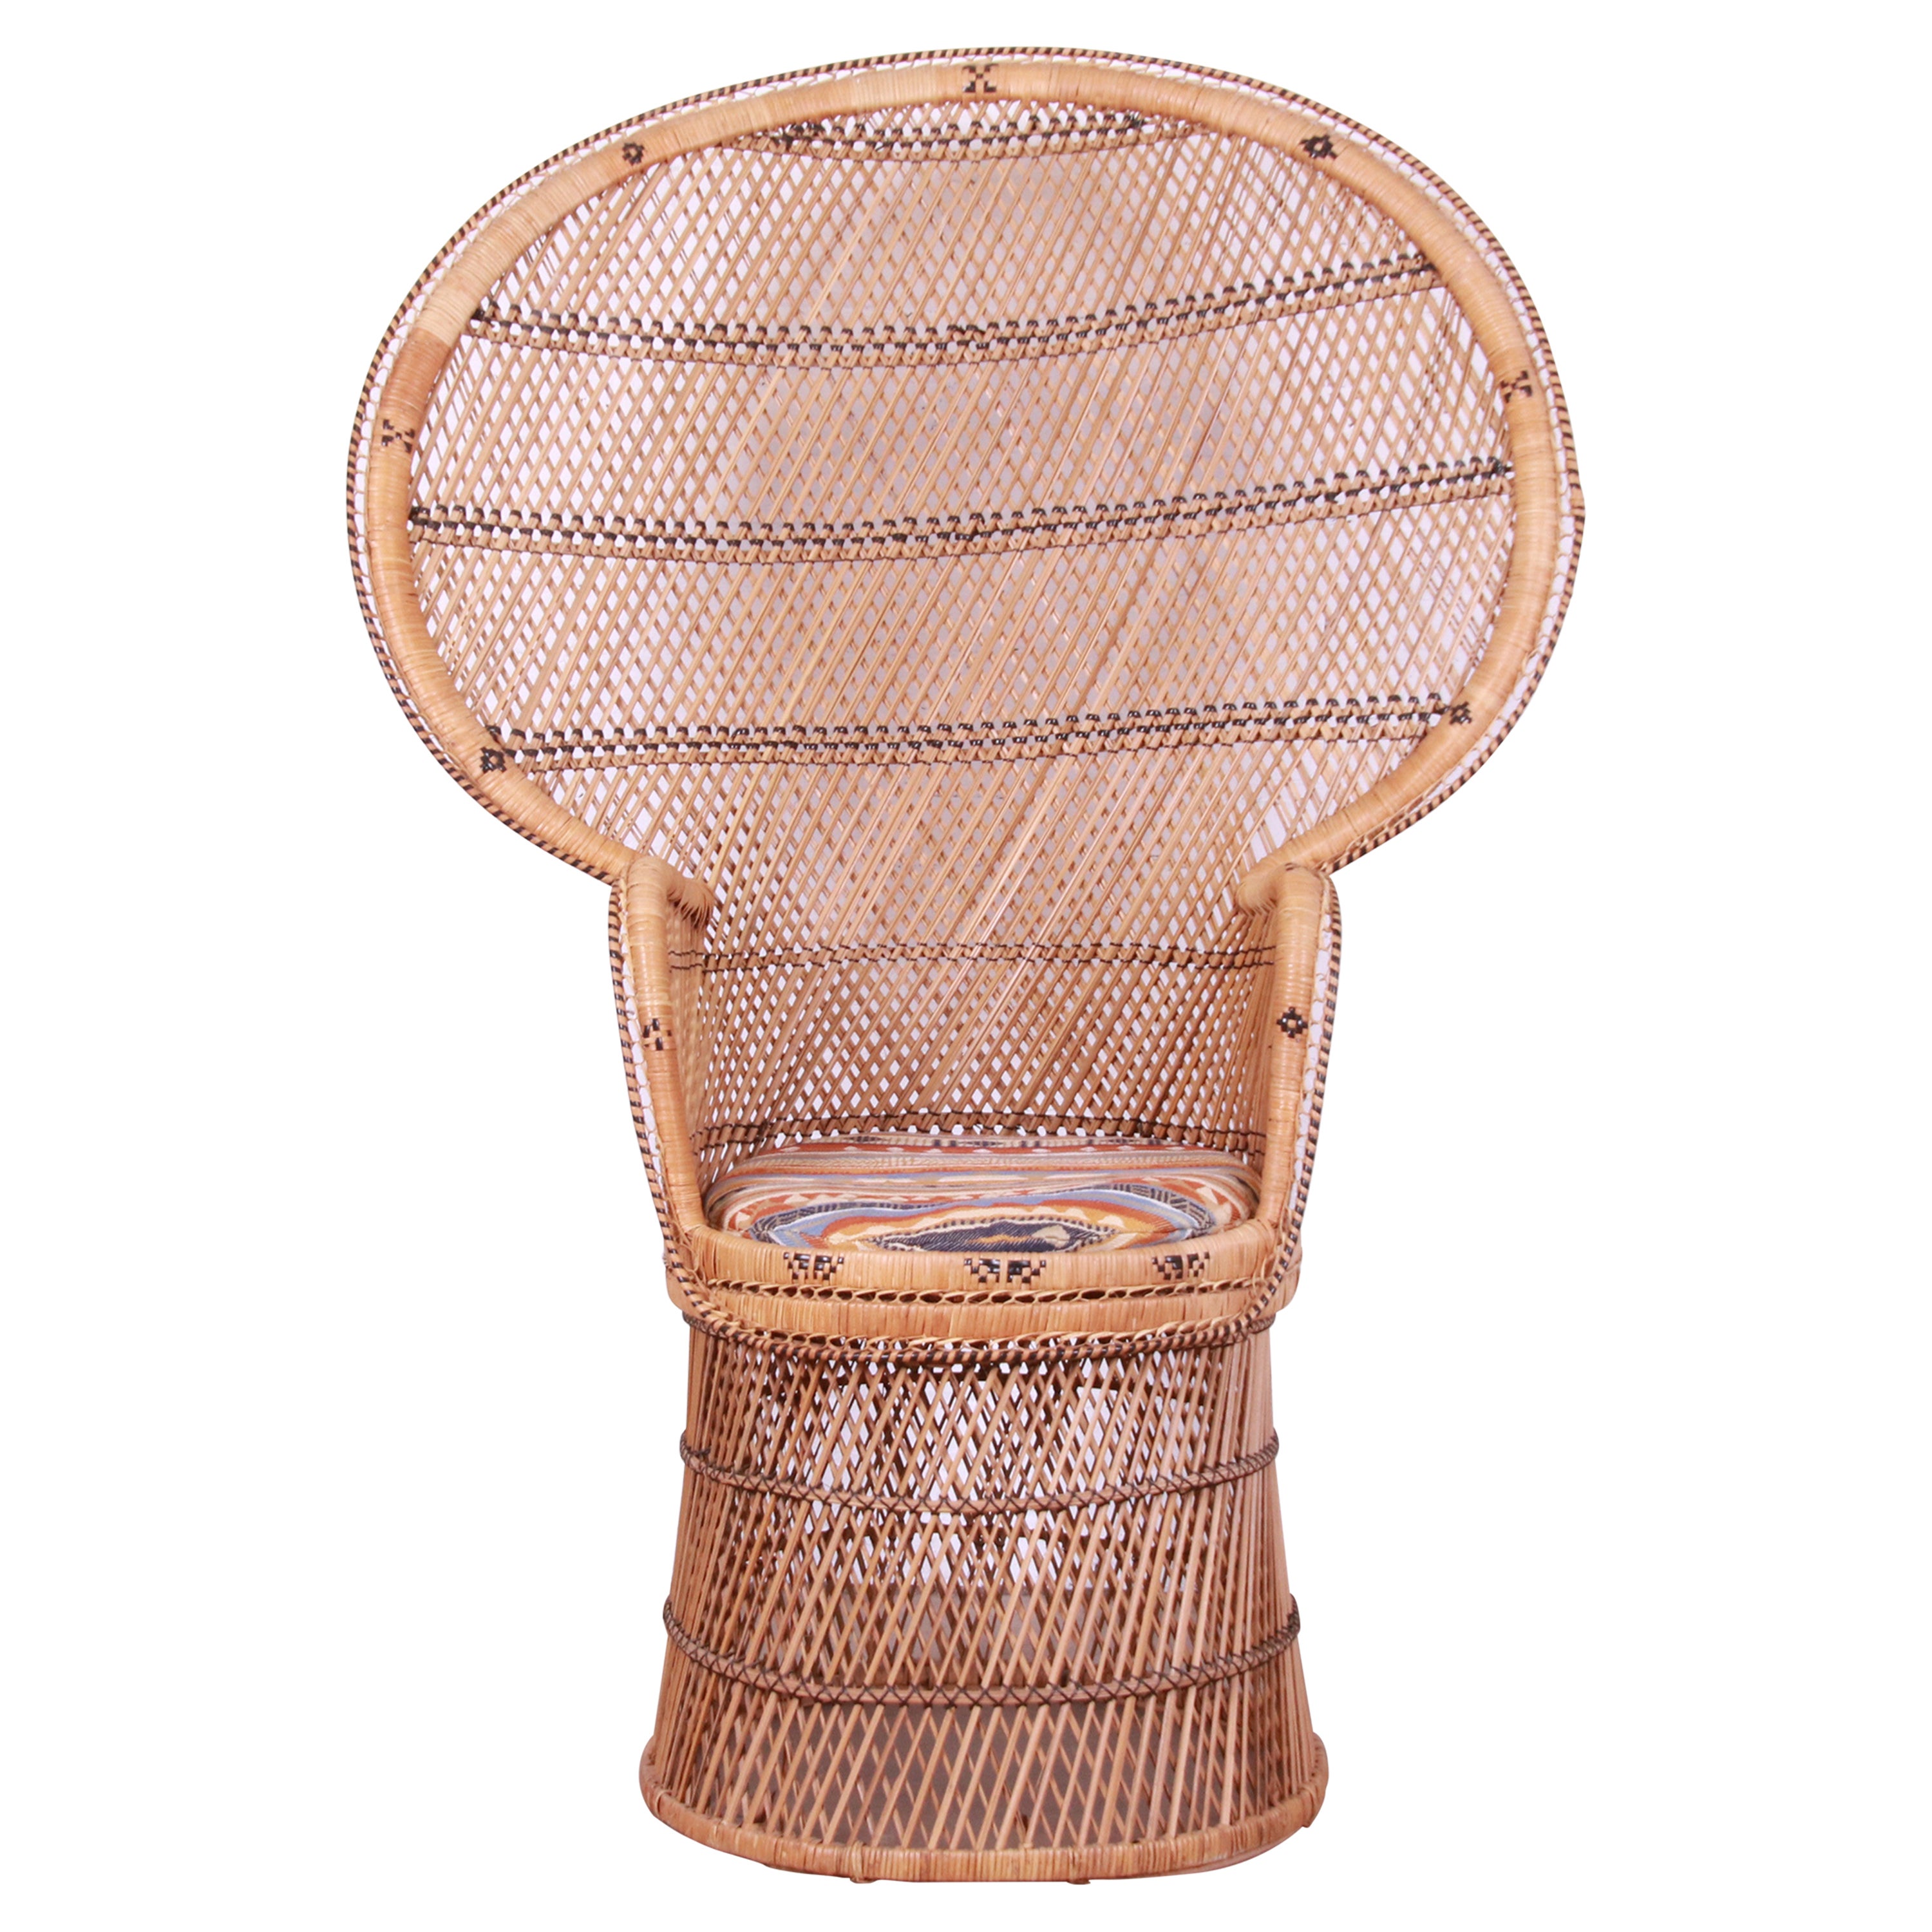 Iconic Bohemian Wicker Emanuelle Peacock Chair, 1970s